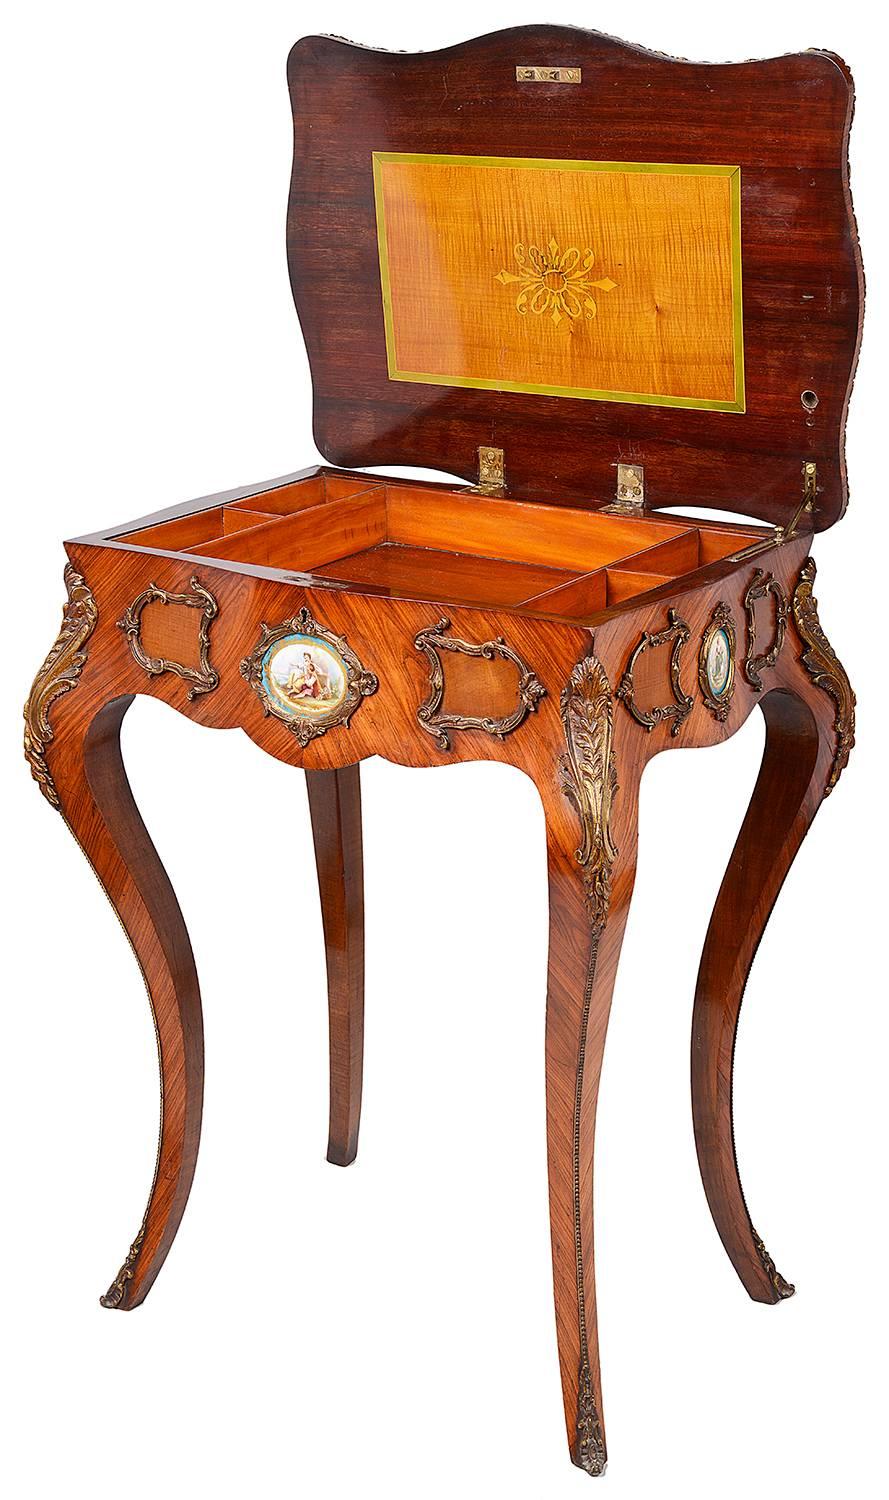 A very good quality 19th century French kingwood marquetry inlaid side table, having a hinged top, opening to reveal a compartmented interior. Sèvres style porcelain plaques inset to the frieze, gilded ormolu mounts and raised on elegant cabriole